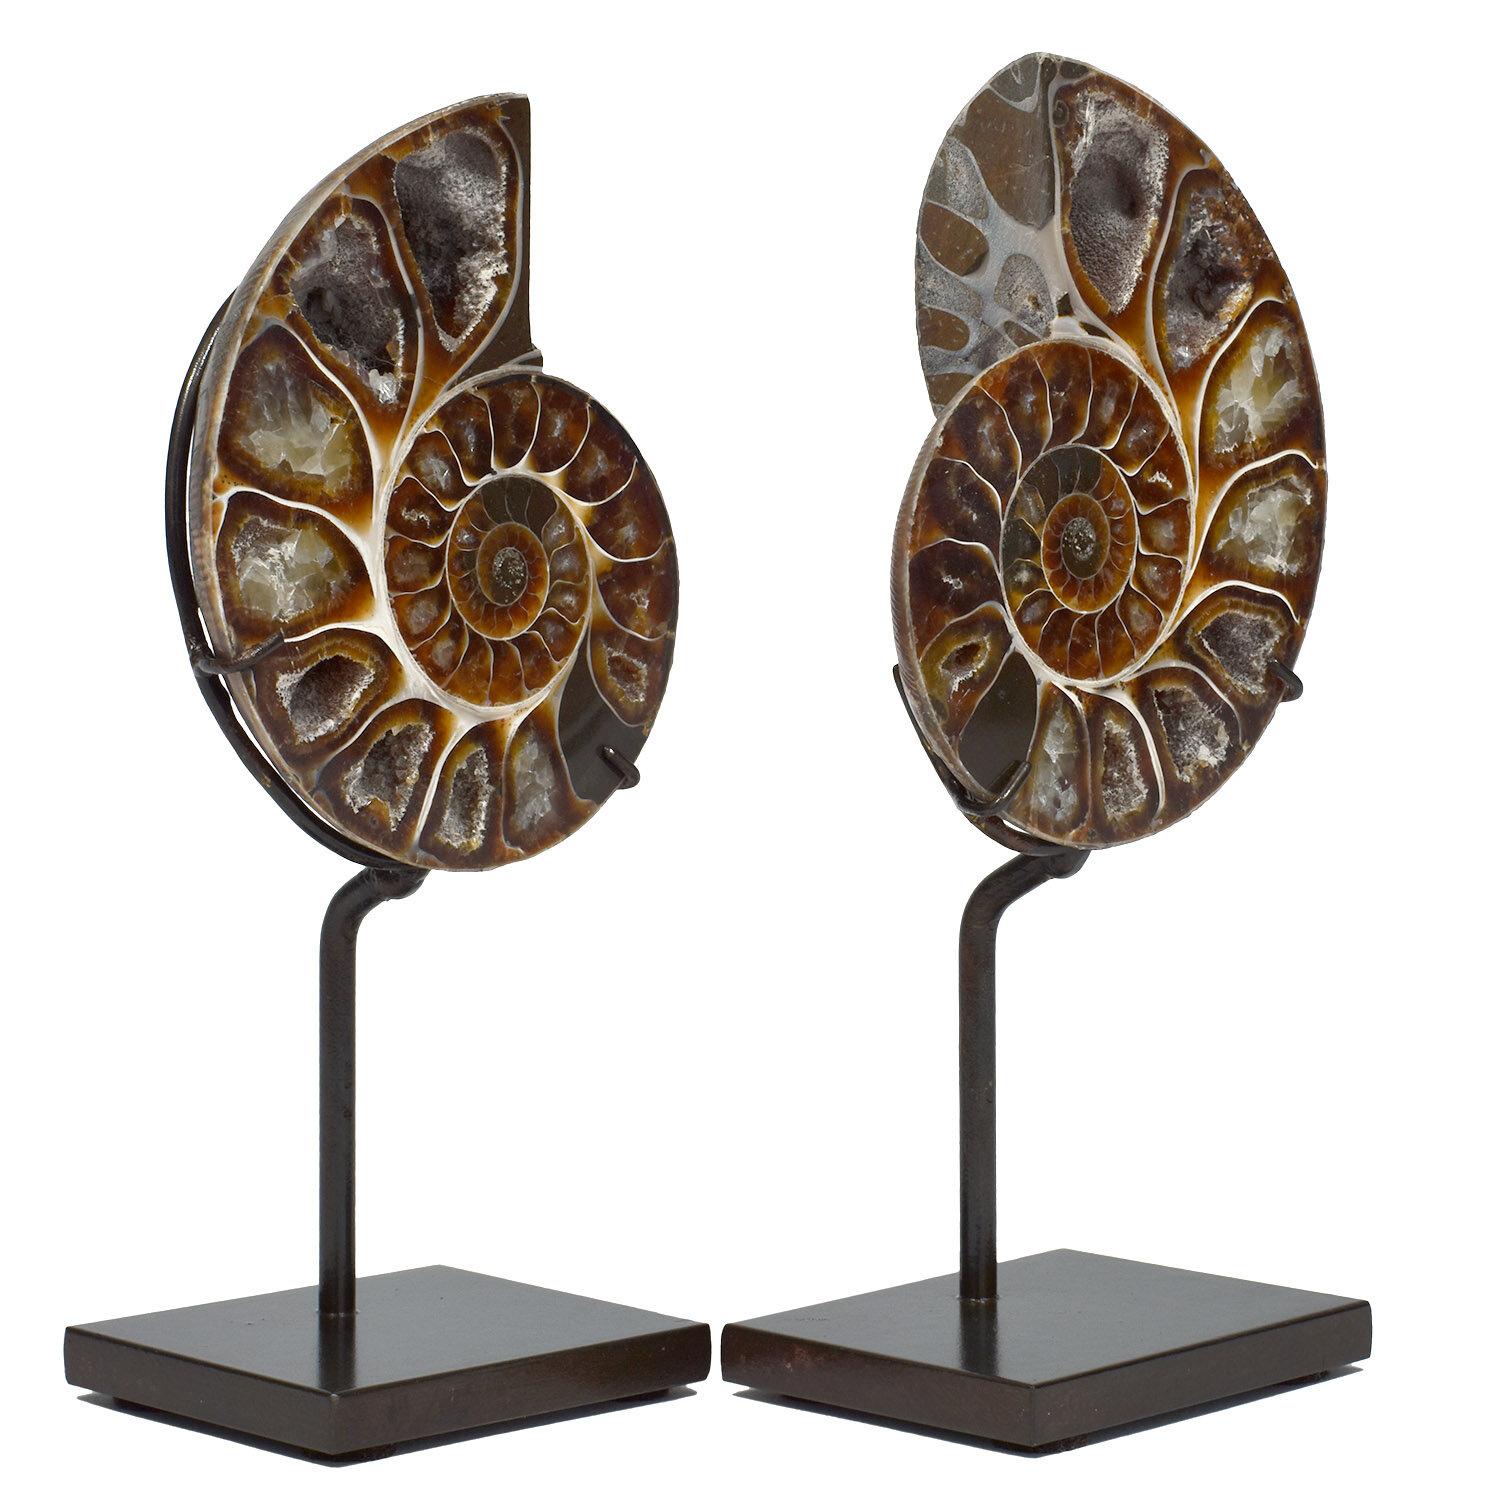 Matched Pair of Split Ammonite Fossil

This specimen is unusual as it had larger chambers than most other examples.  Possibly a less common species?  We hand pick each set, looking for minimal grey-matrix filled chambers.  The more chambers that are